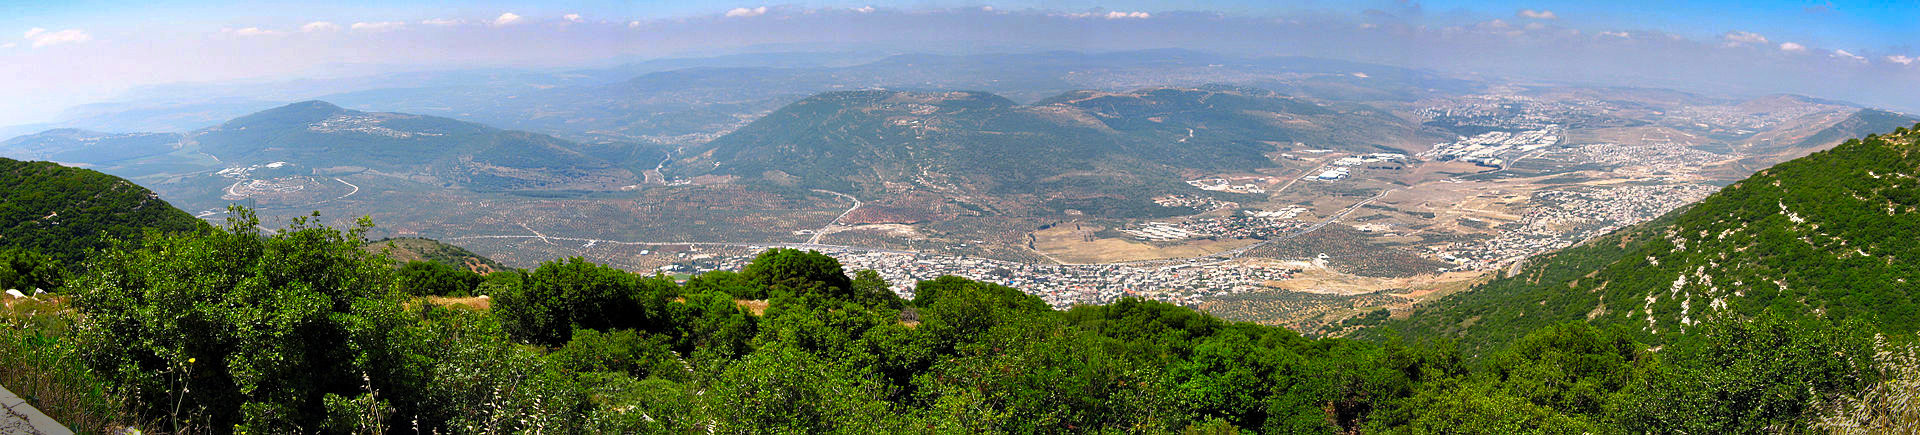 Panorama from Har Ari in the Galilee looking southwards, the large town in the middle is Rameh and the hill behind it is Har Kamon, to the right of Rameh is Sajur, Israel. Photographer: Someone35. Copyrighted. Licensed (CC BY-SA 3.0)